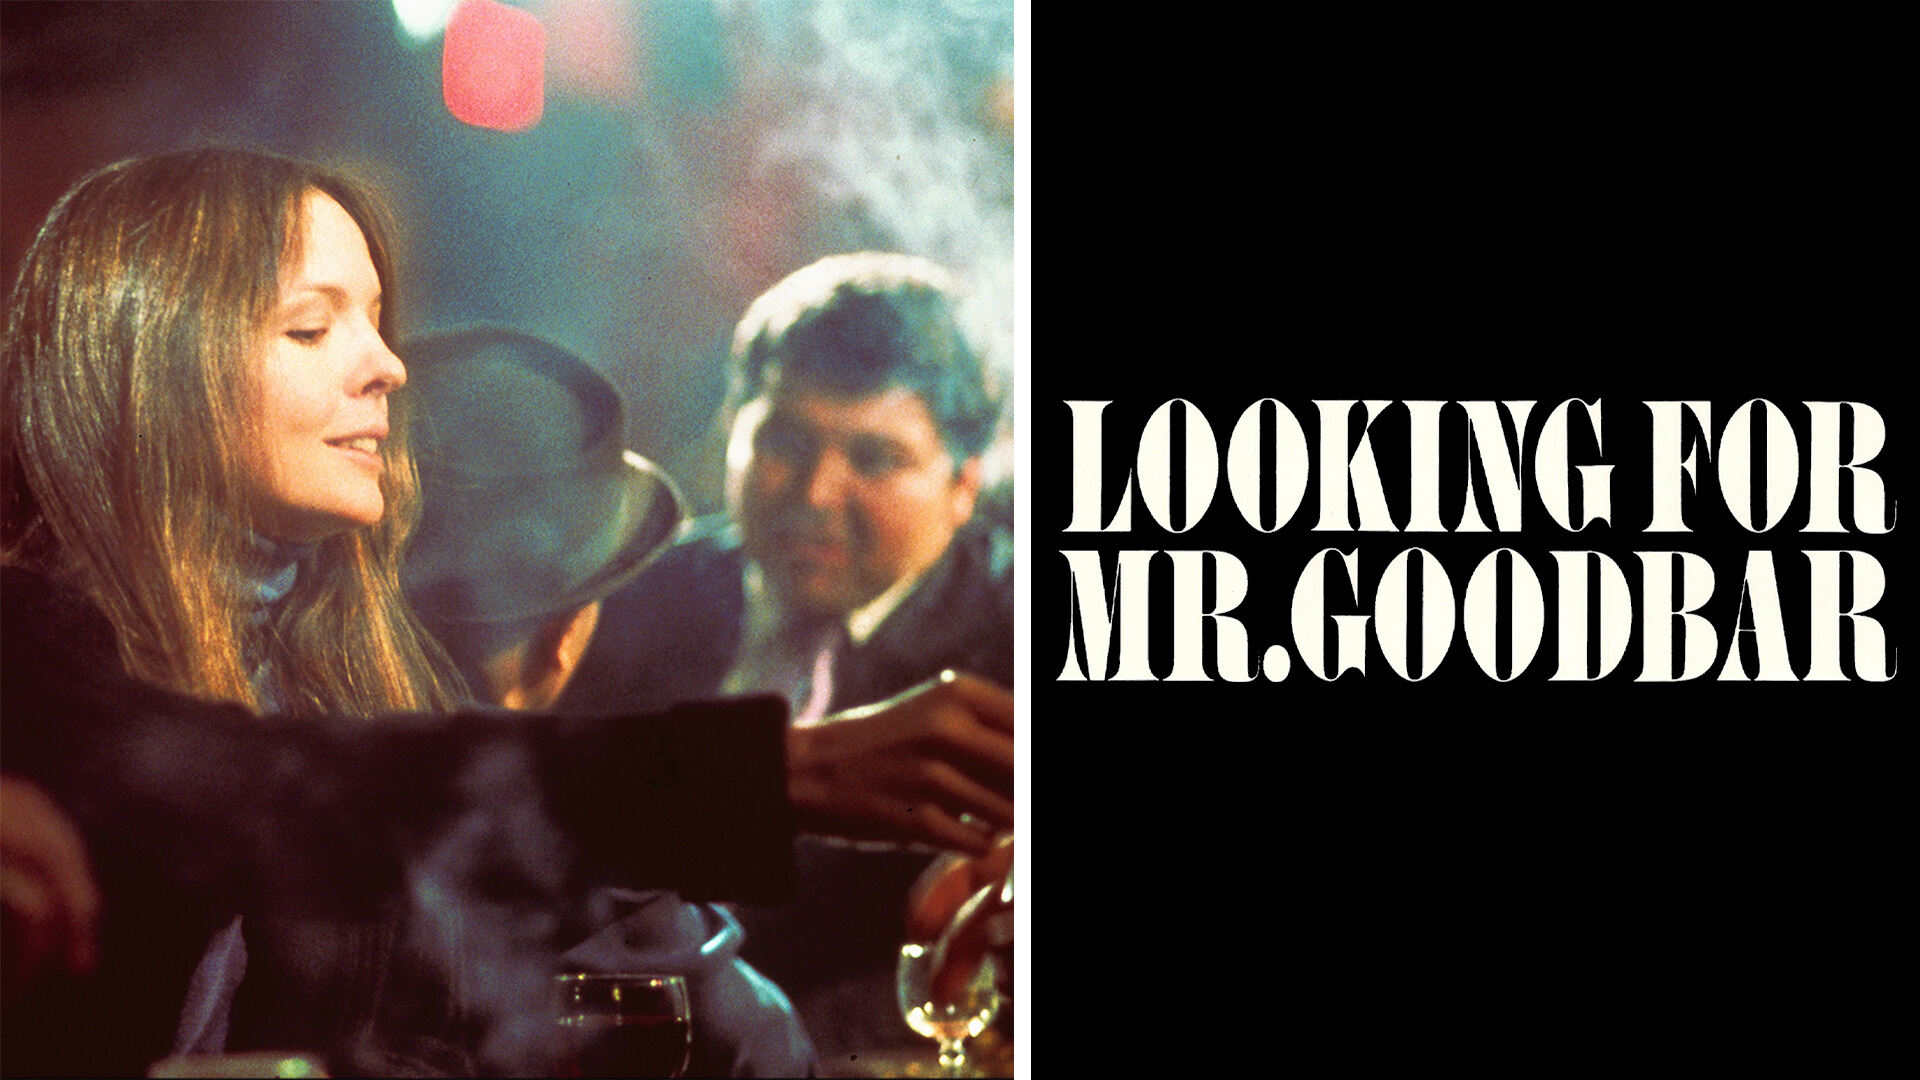 37-facts-about-the-movie-looking-for-mr-goodbar